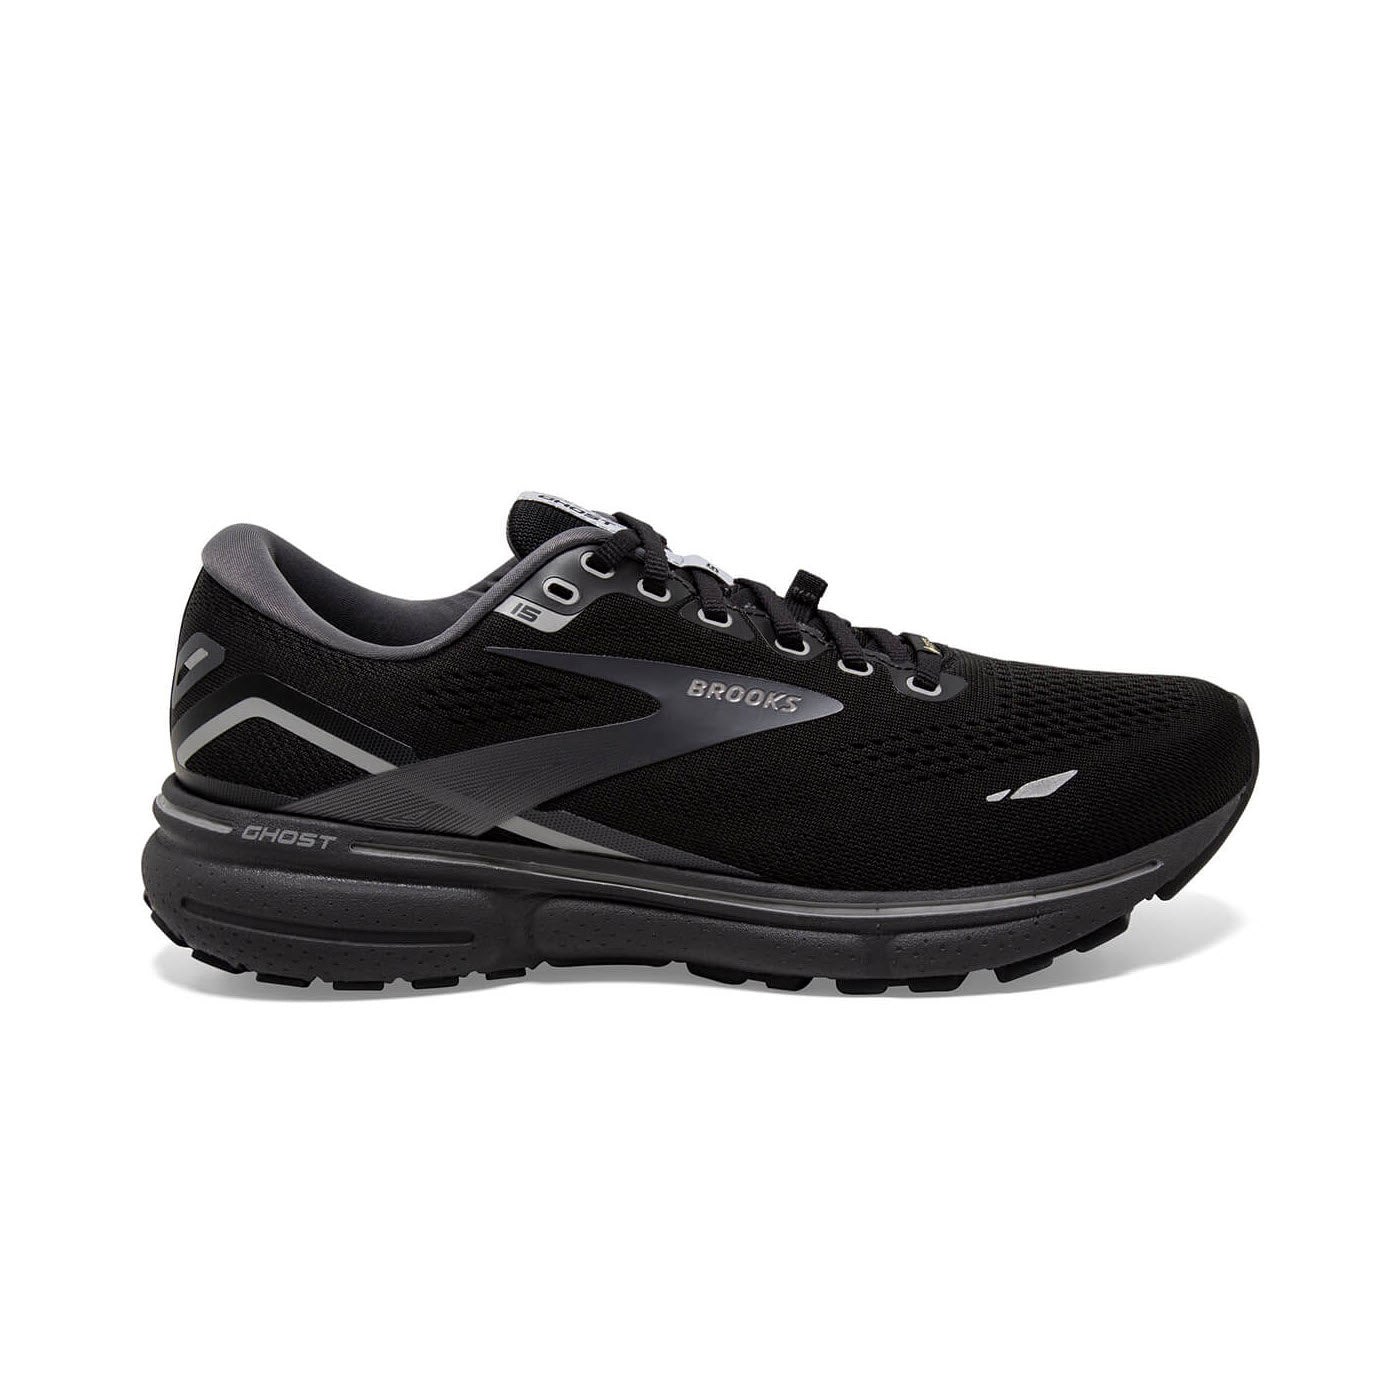 A Brooks Ghost 15 GTX Black/Blackened Pearl running shoe, designed with DNA LOFT cushioning and stylish gray accents, displayed in profile view against a white background.